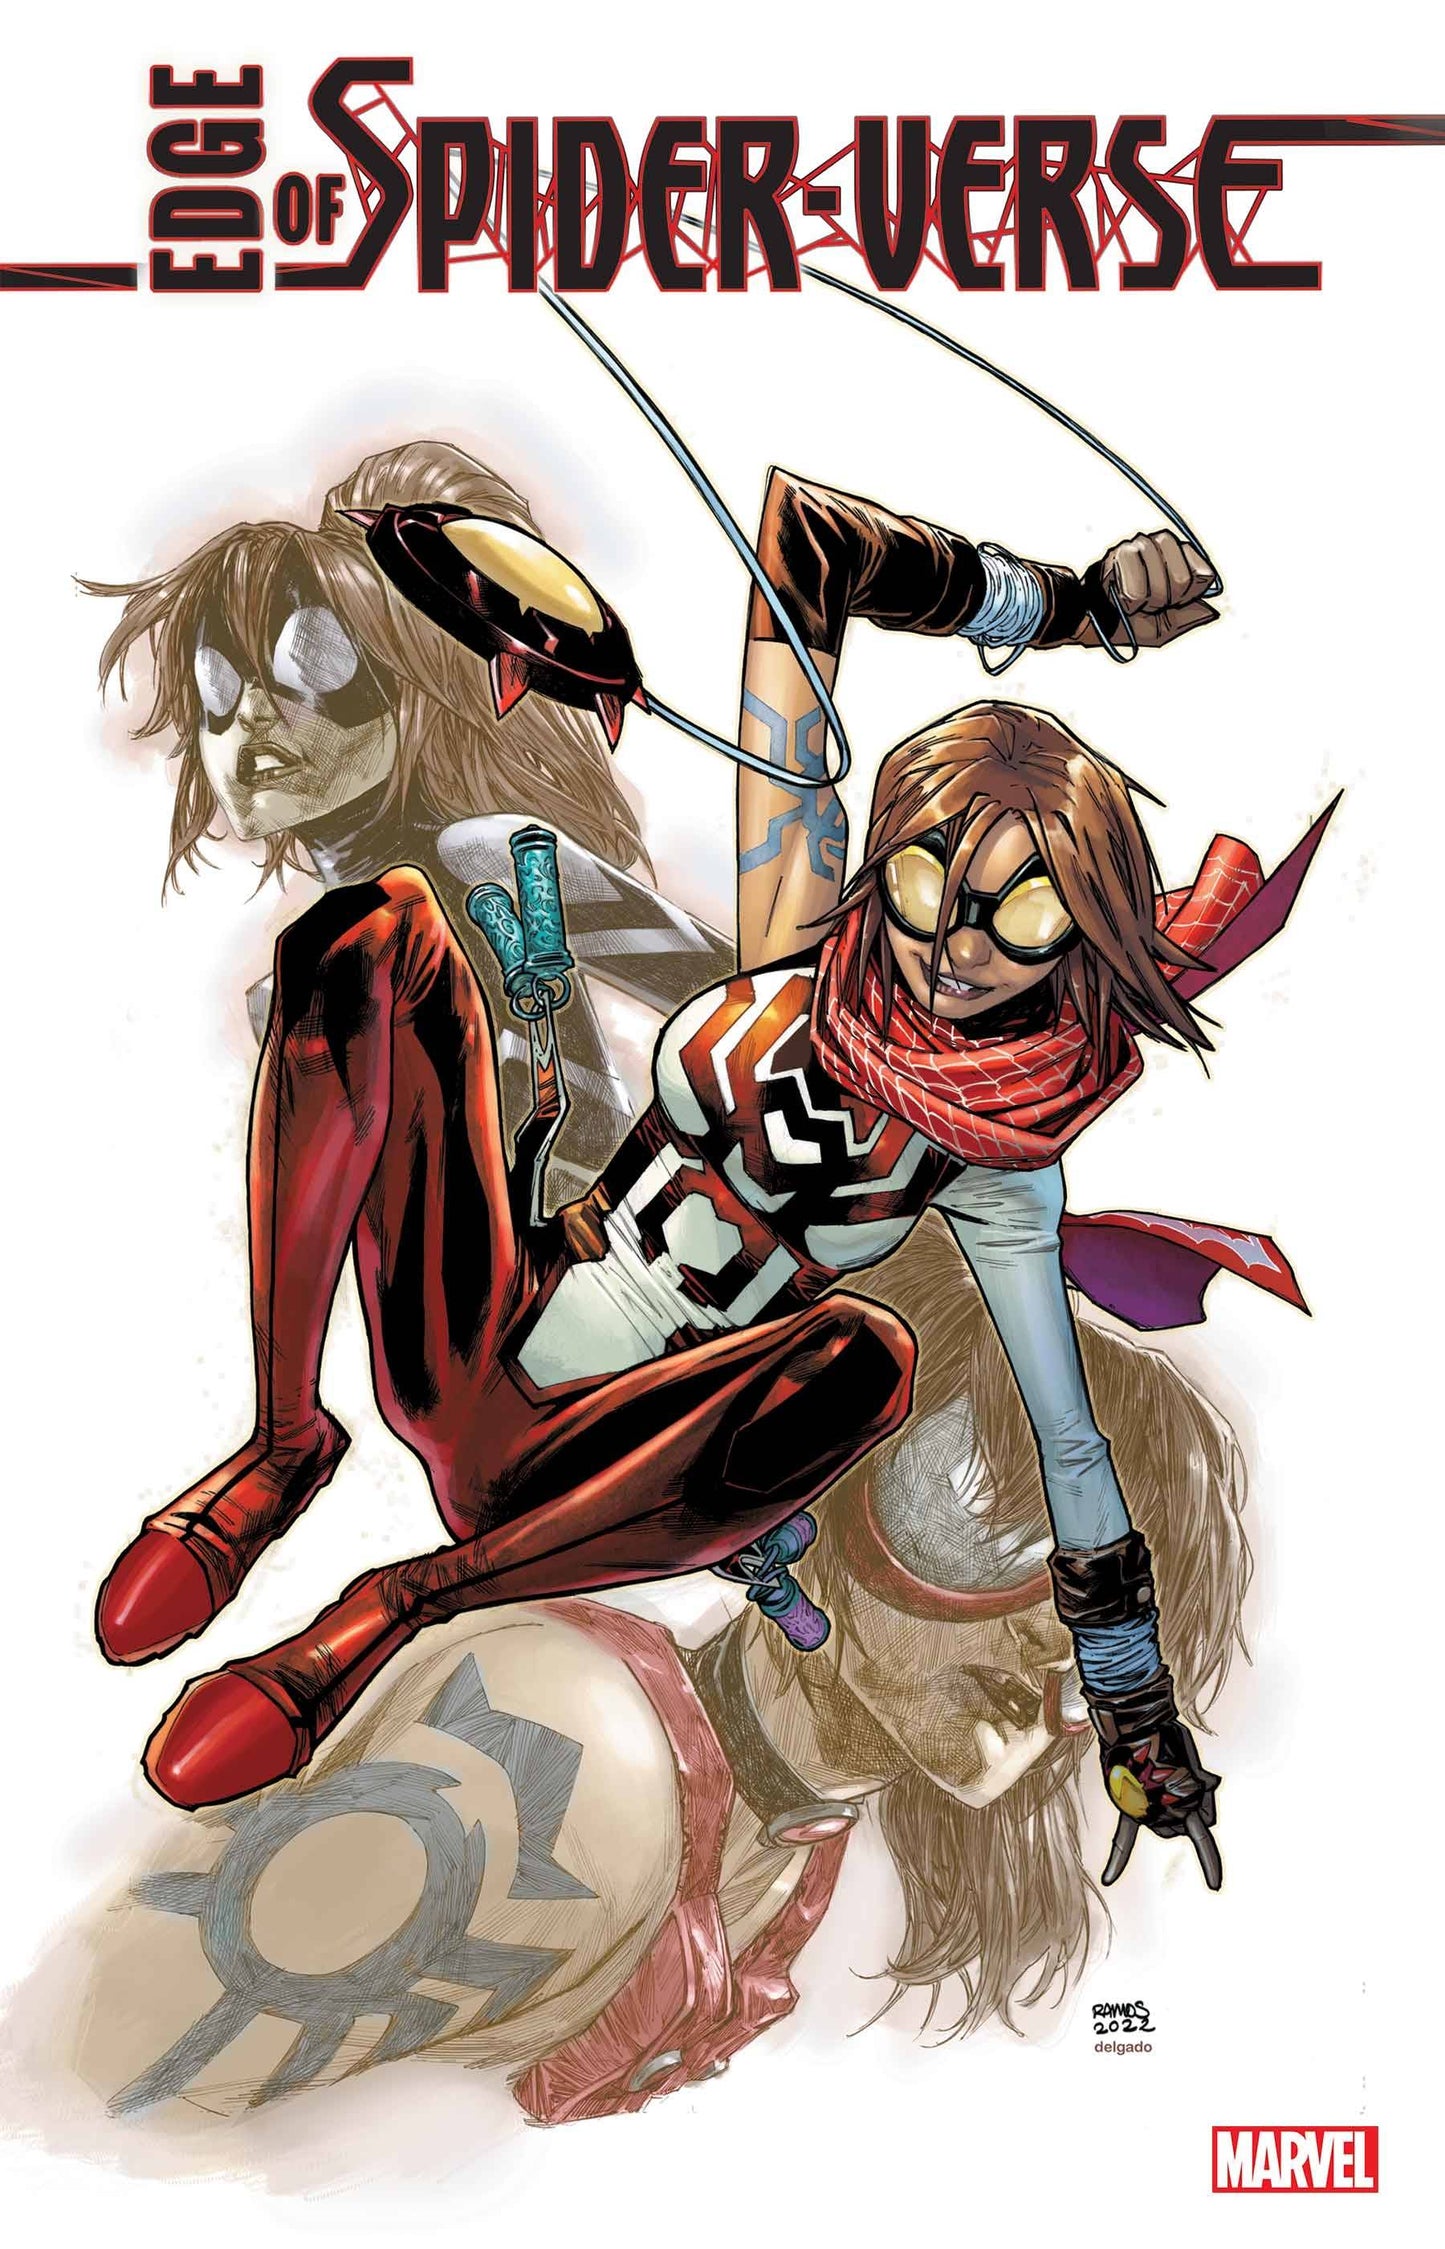 EDGE OF SPIDER-VERSE #1 (OF 5) 1:25 RAMOS VARIANT 2022